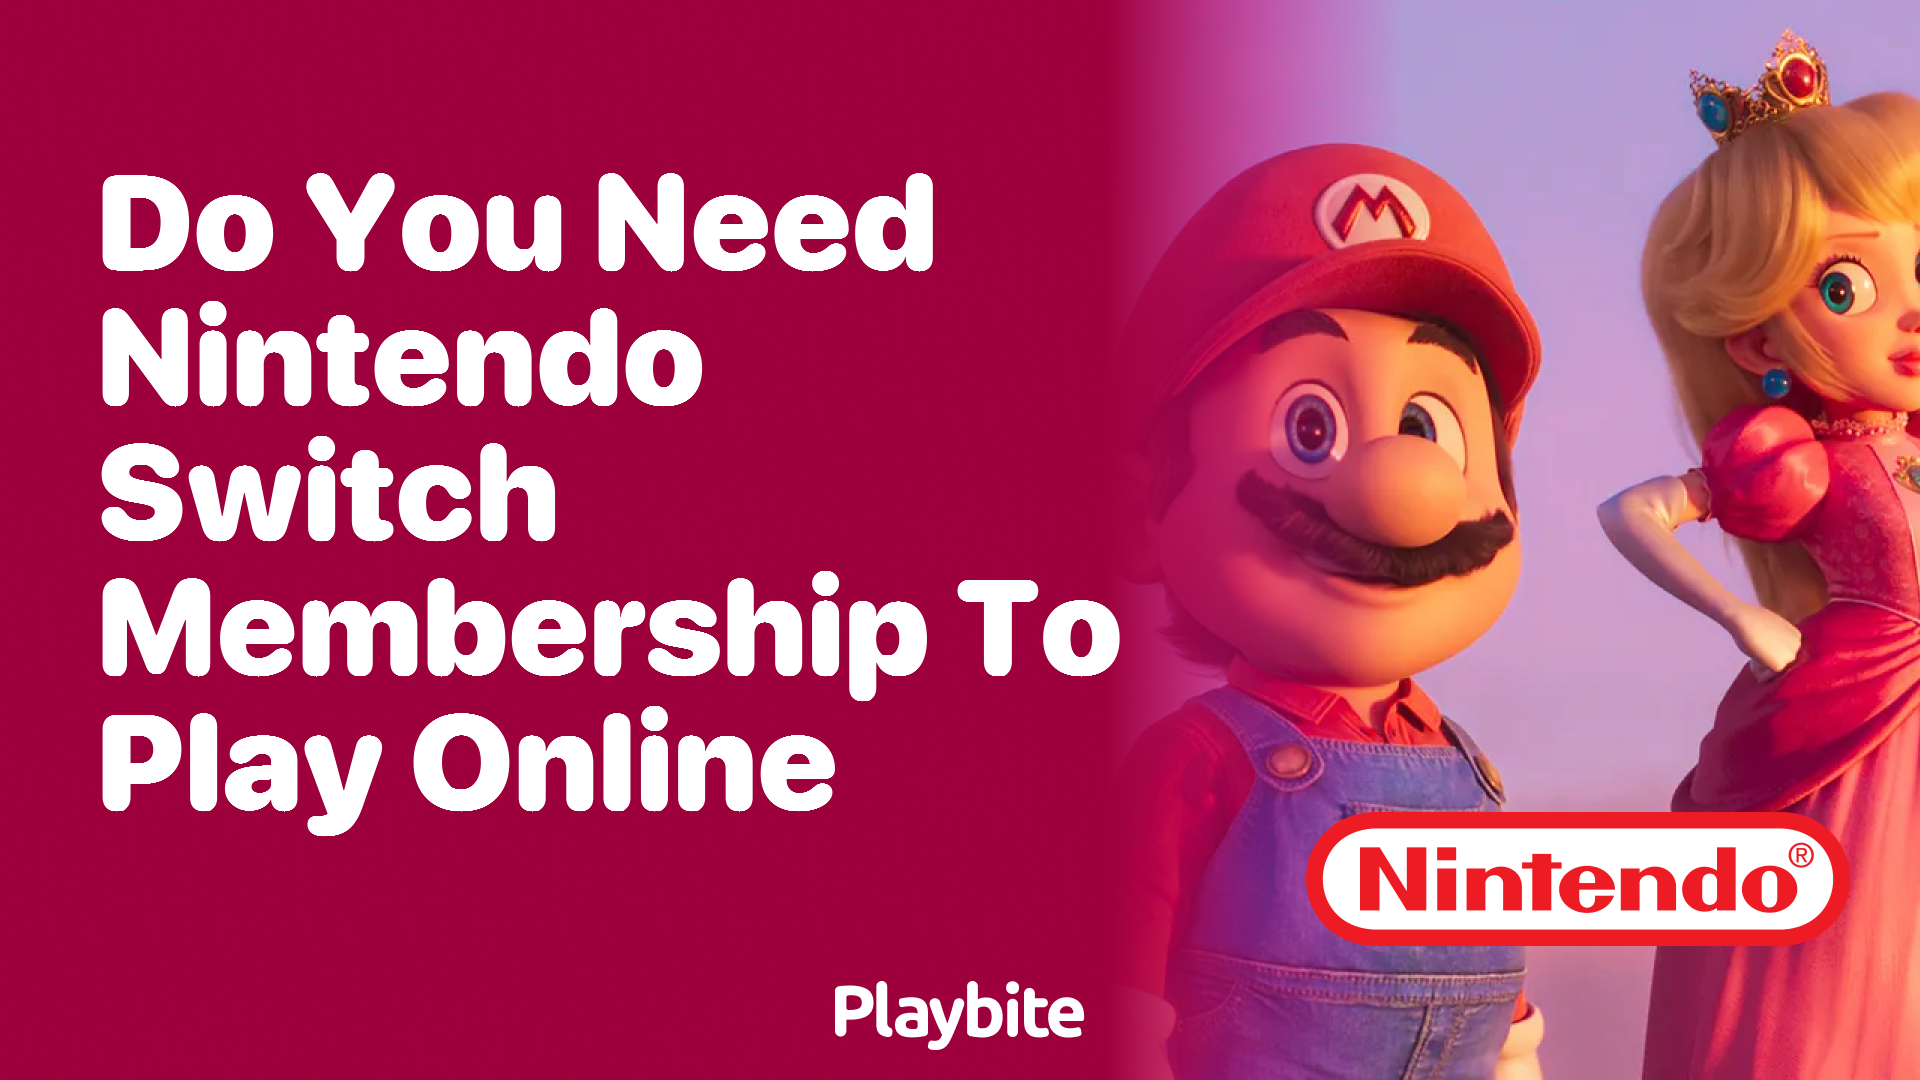 Do You Need a Nintendo Switch Membership to Play Online?